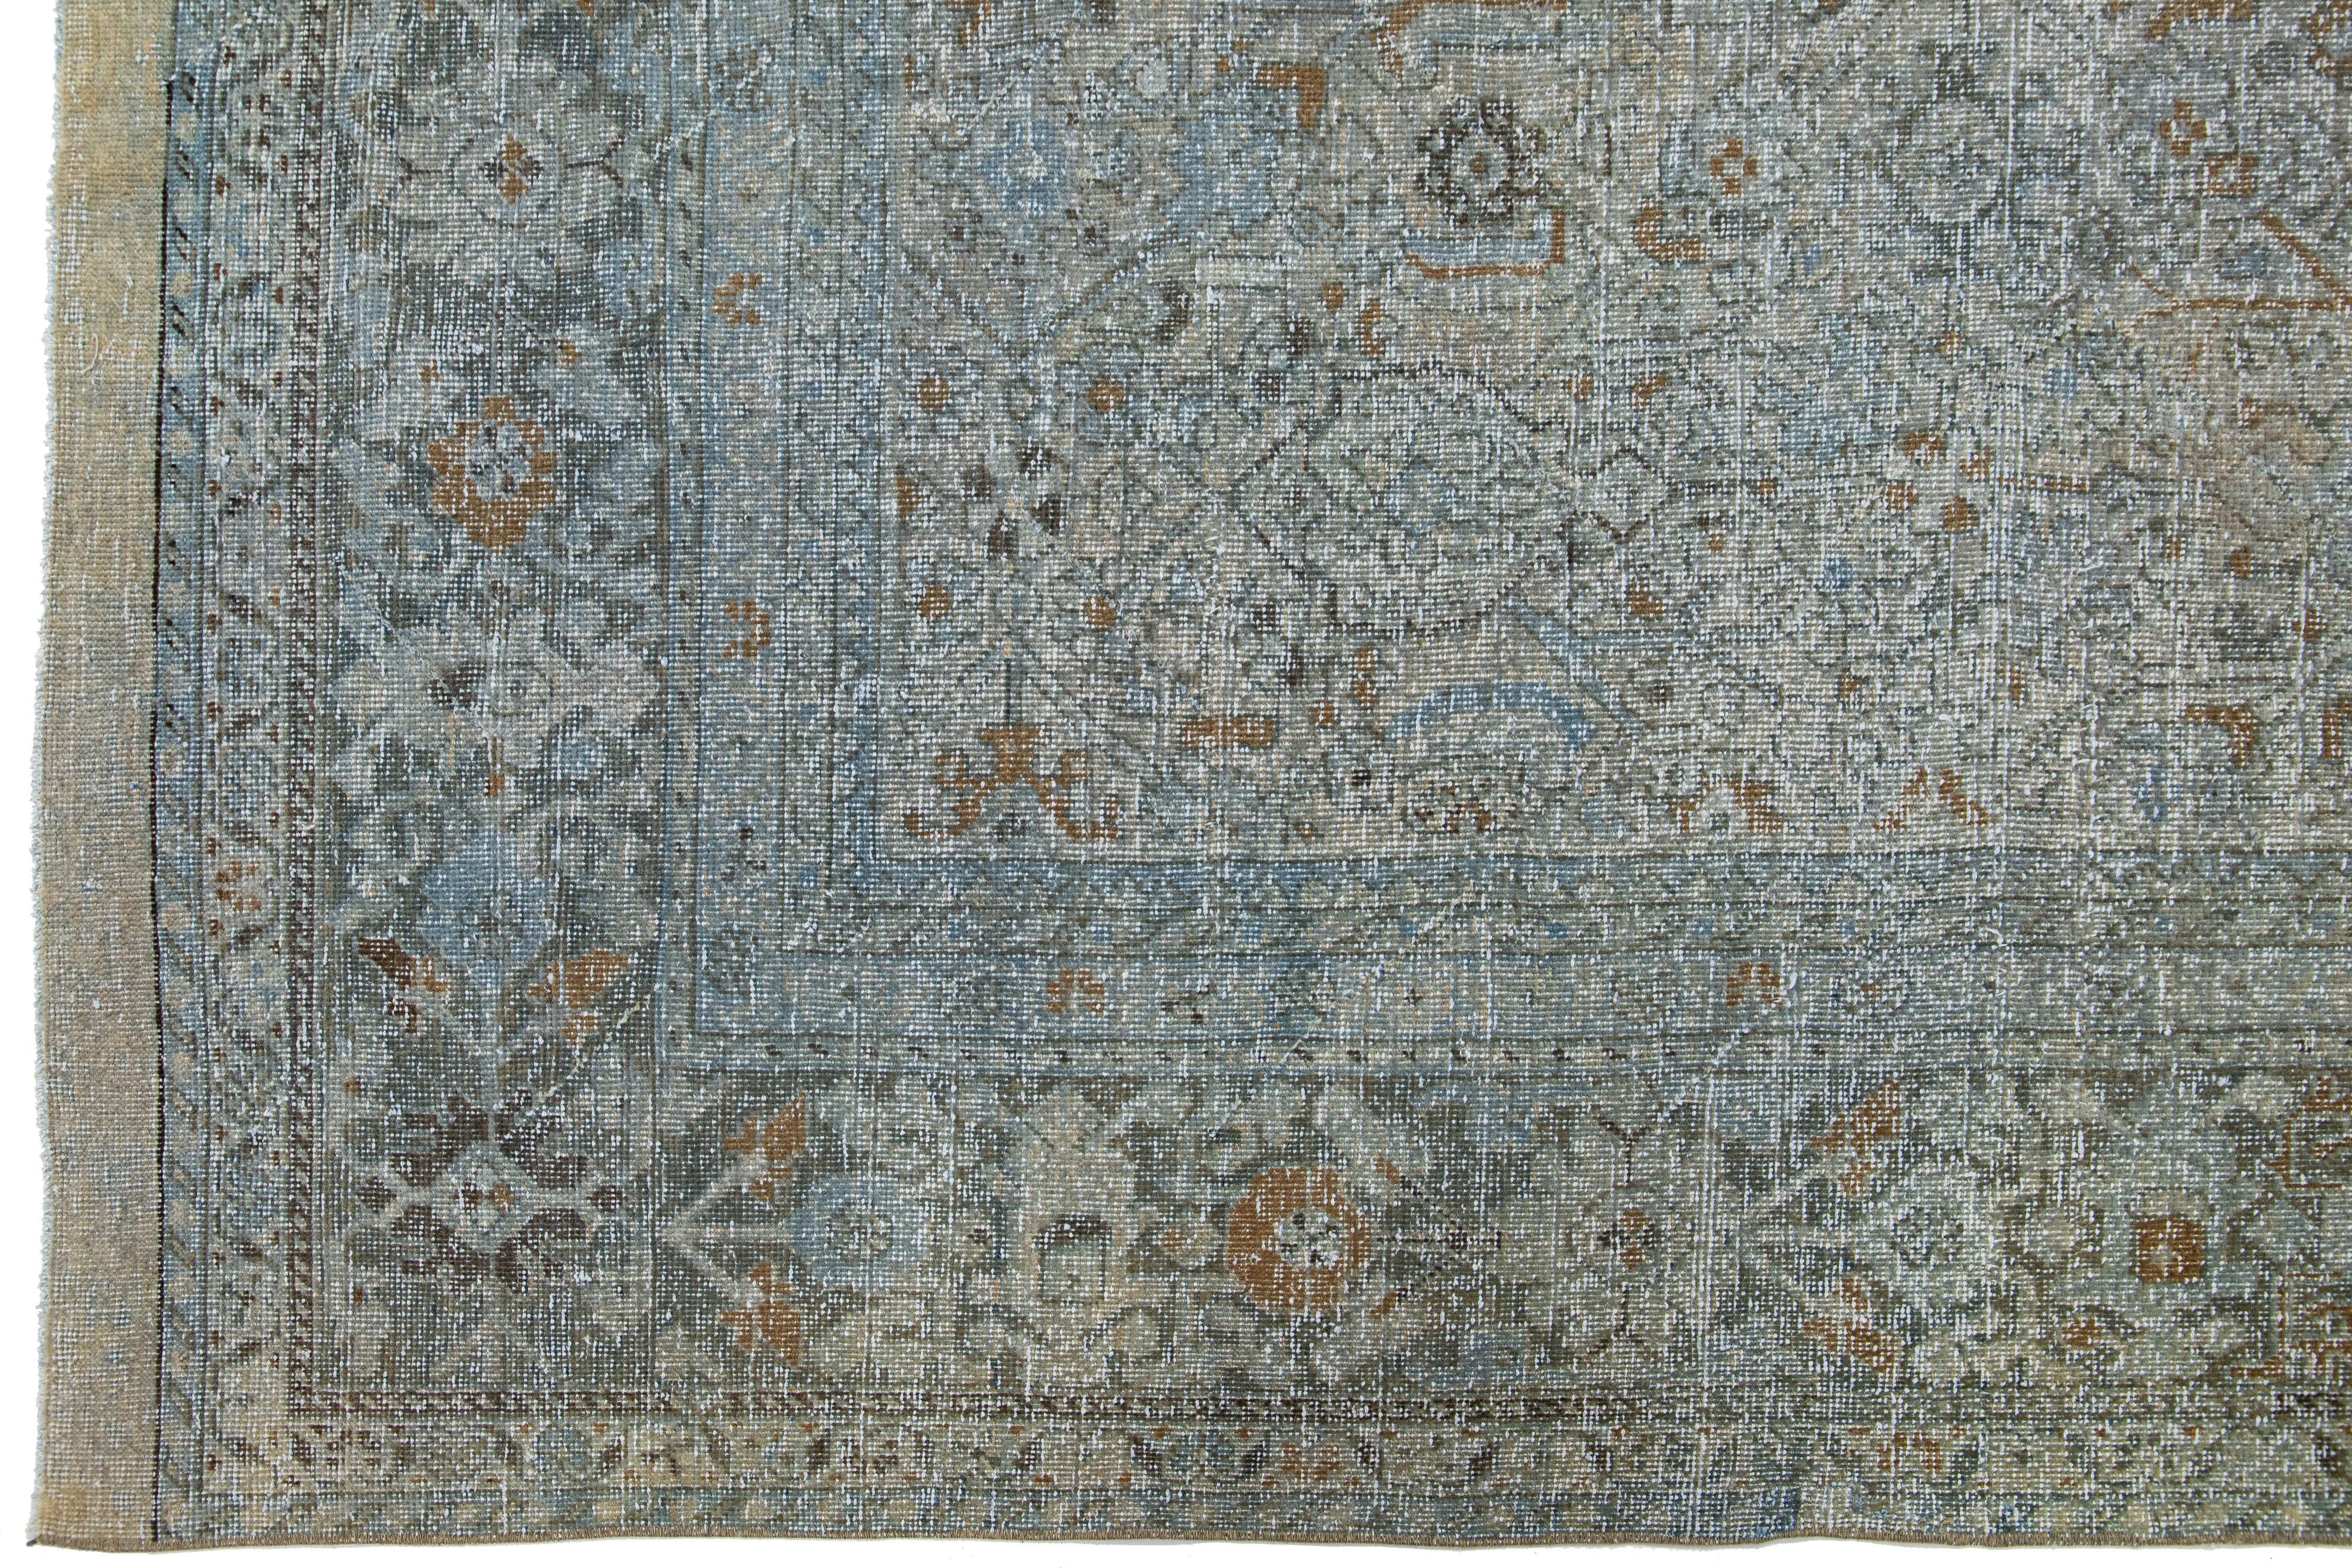 19th Century Antique Persian Tabriz Wool Rug with Allover Design In Gray For Sale 2